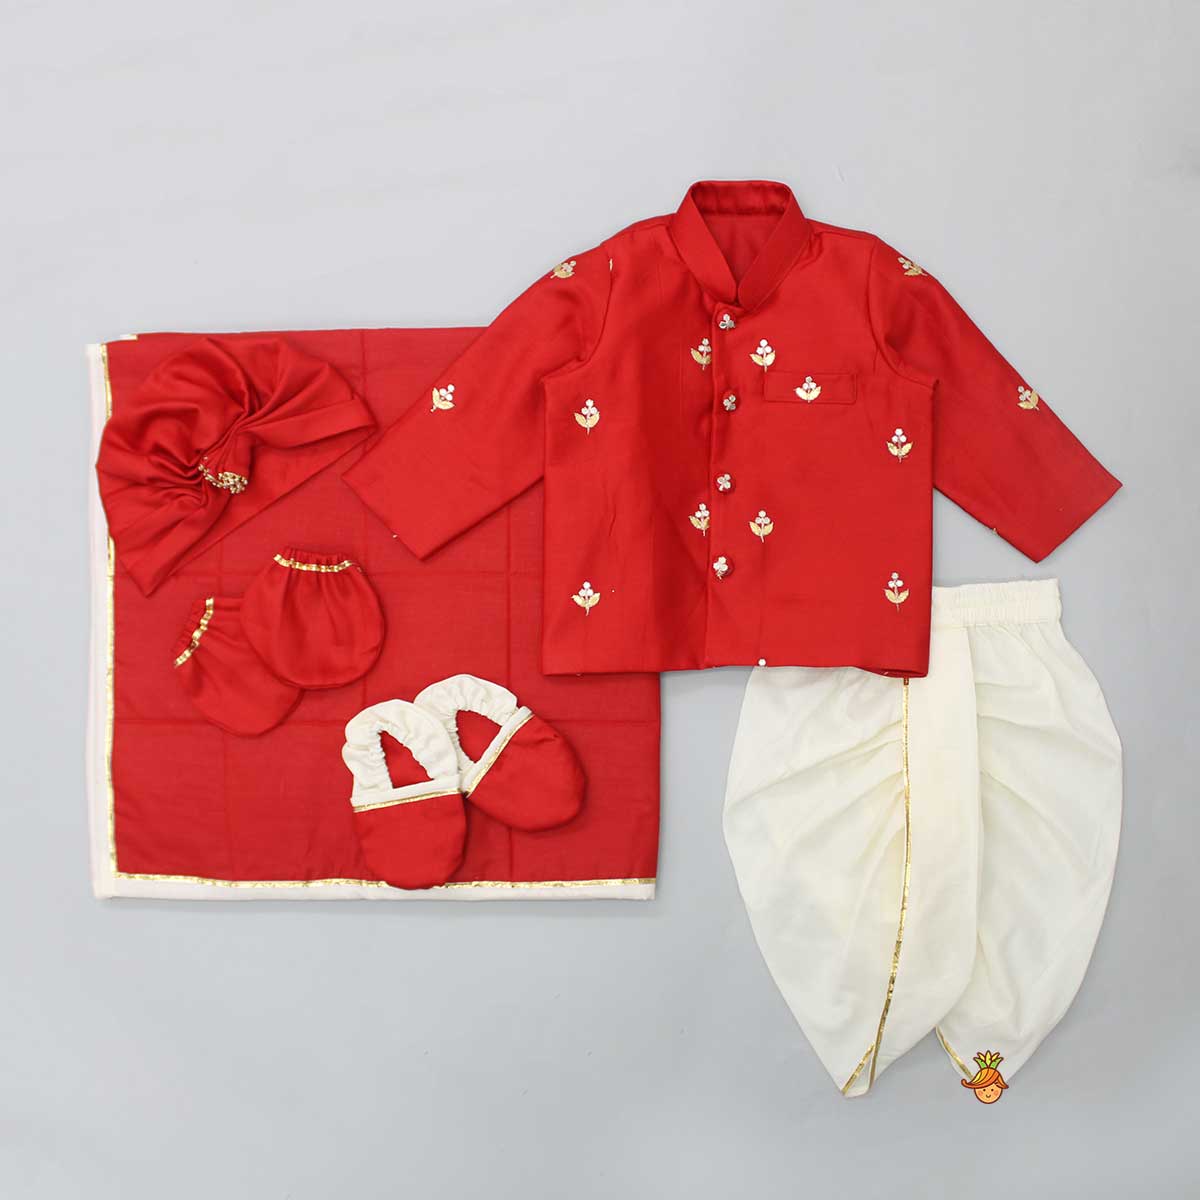 Gota Floral Motif Embroidered Infant Baby Set With Swaddle